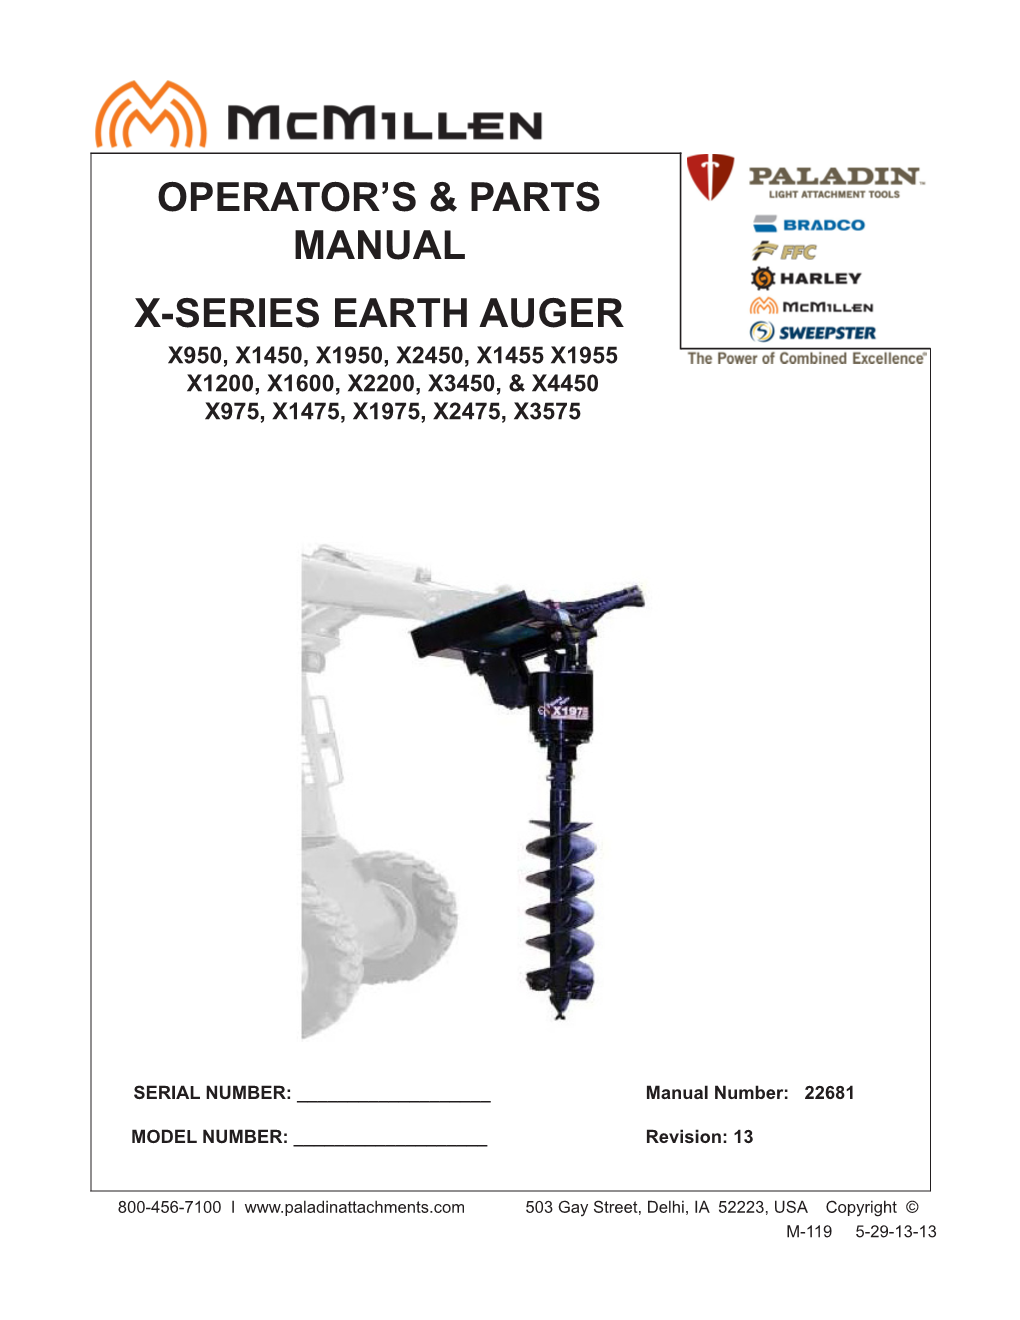 Operator's & Parts Manual X-Series Earth Auger